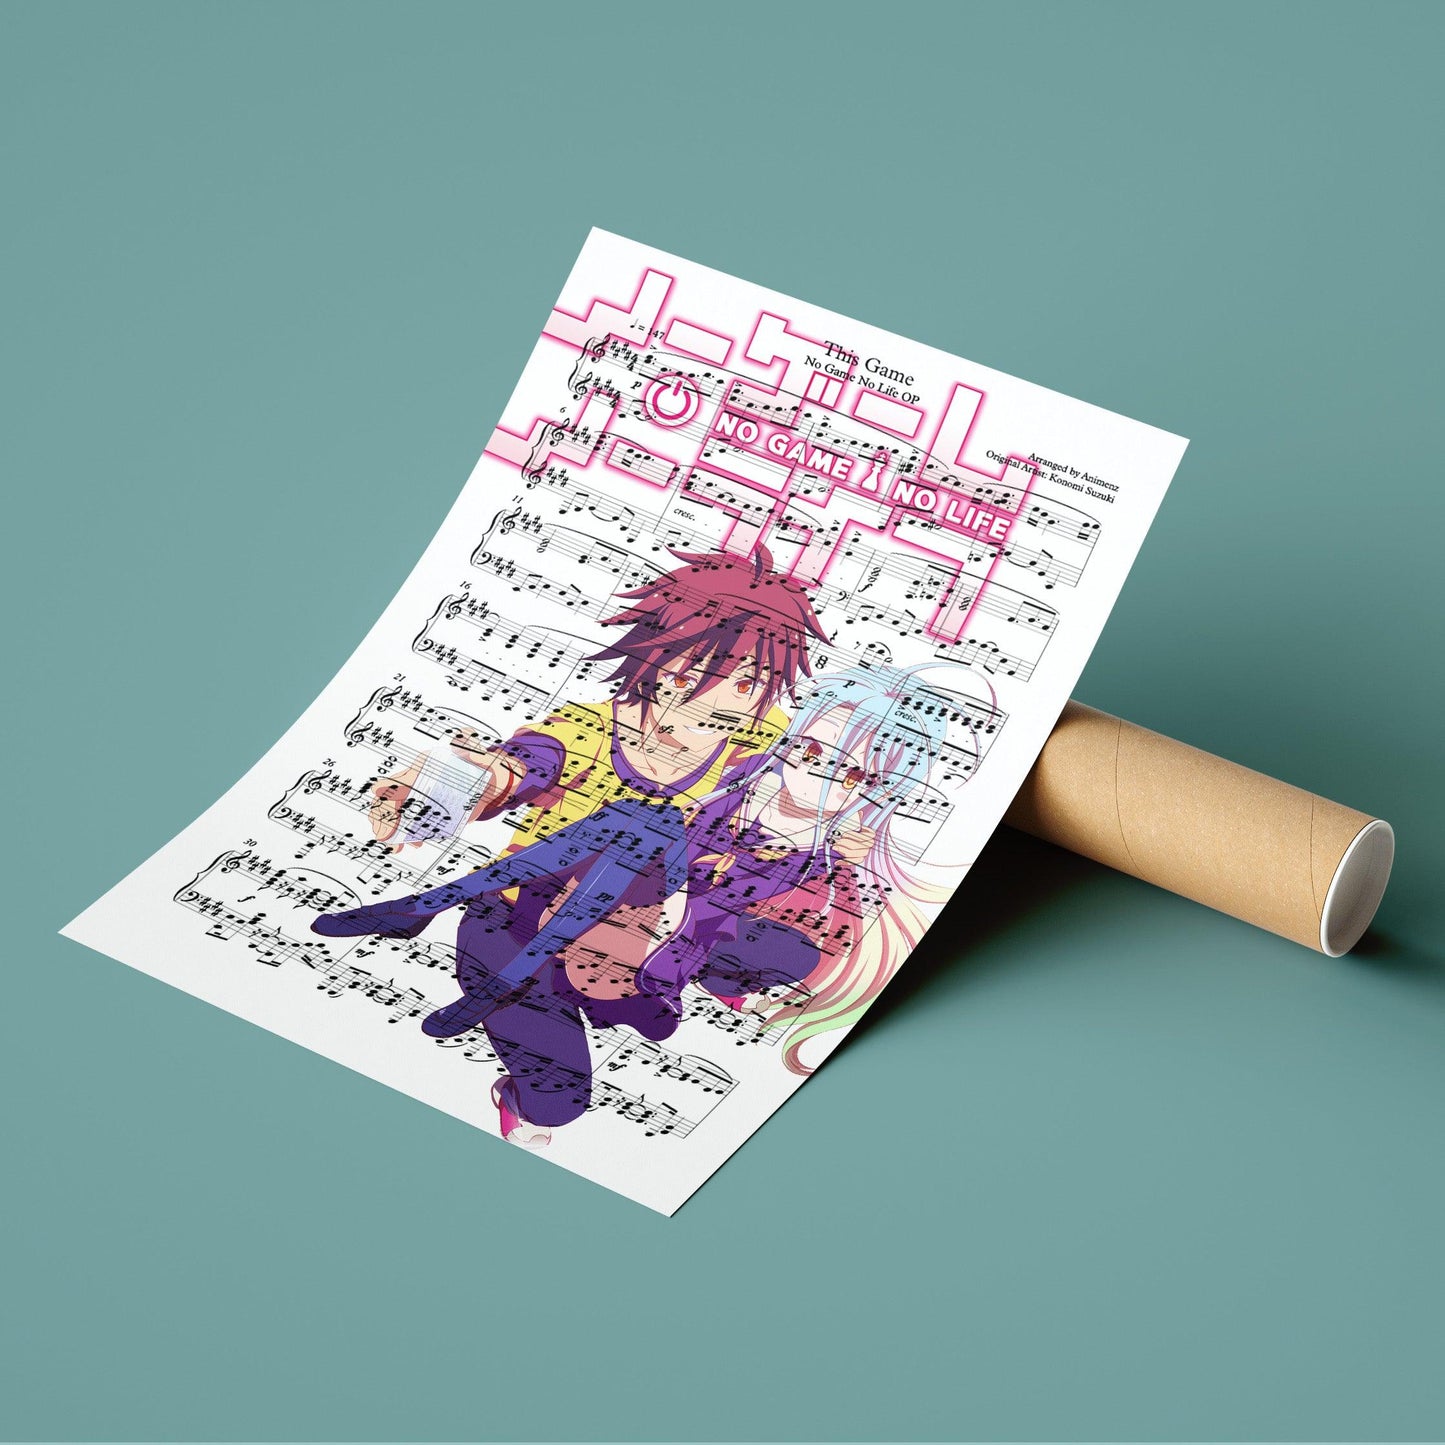 No Game No Life - This Game Poster | Song Music Sheet Notes Print  Everyone has a favorite song and now you can show the score as printed staff. The personal favorite song sheet print shows the song chosen as the score. 